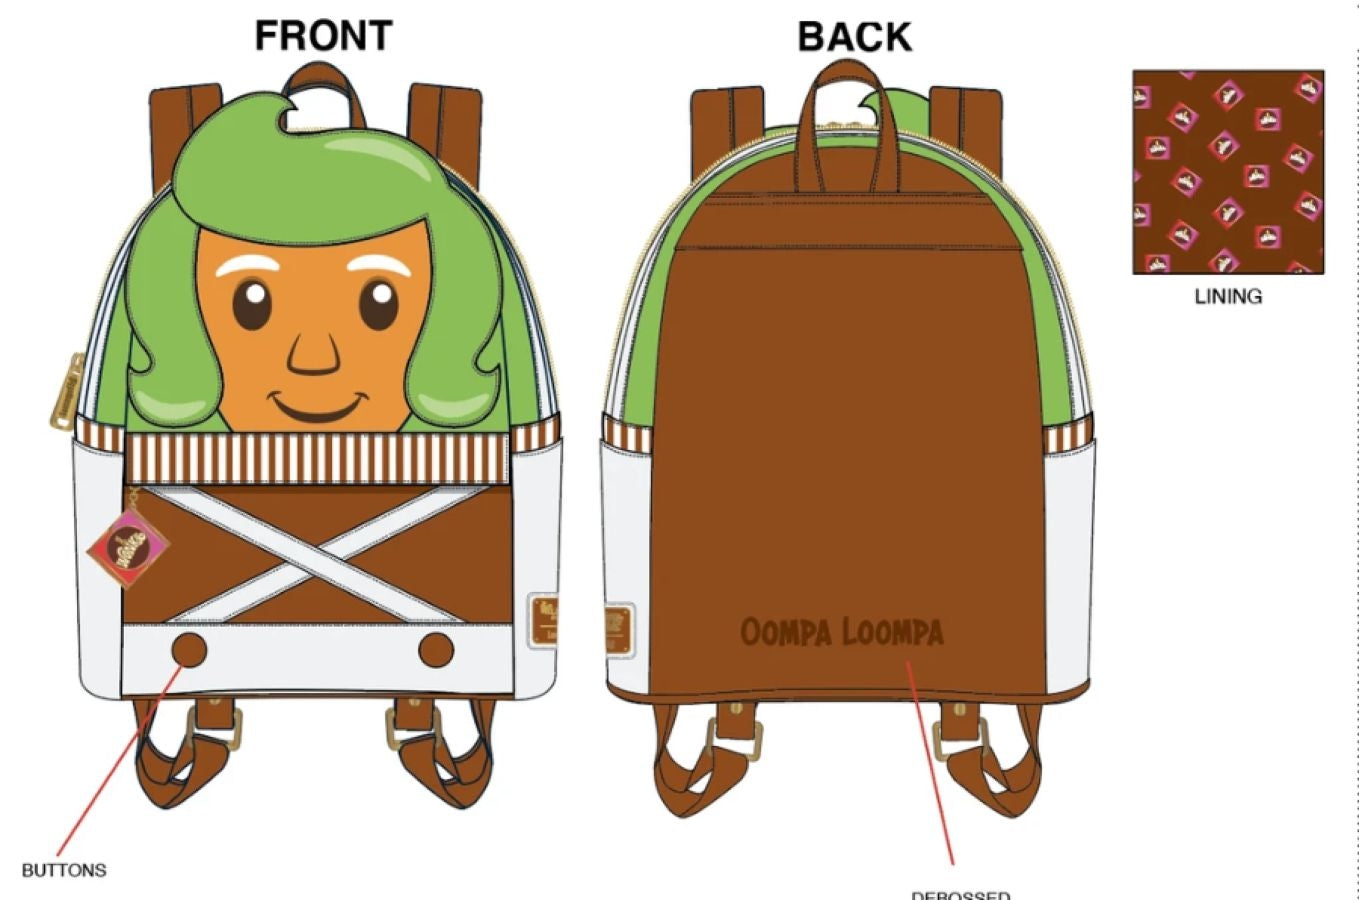 Willy Wonka and the Chocolate Factory - Oompa Loompa Mini Backpack